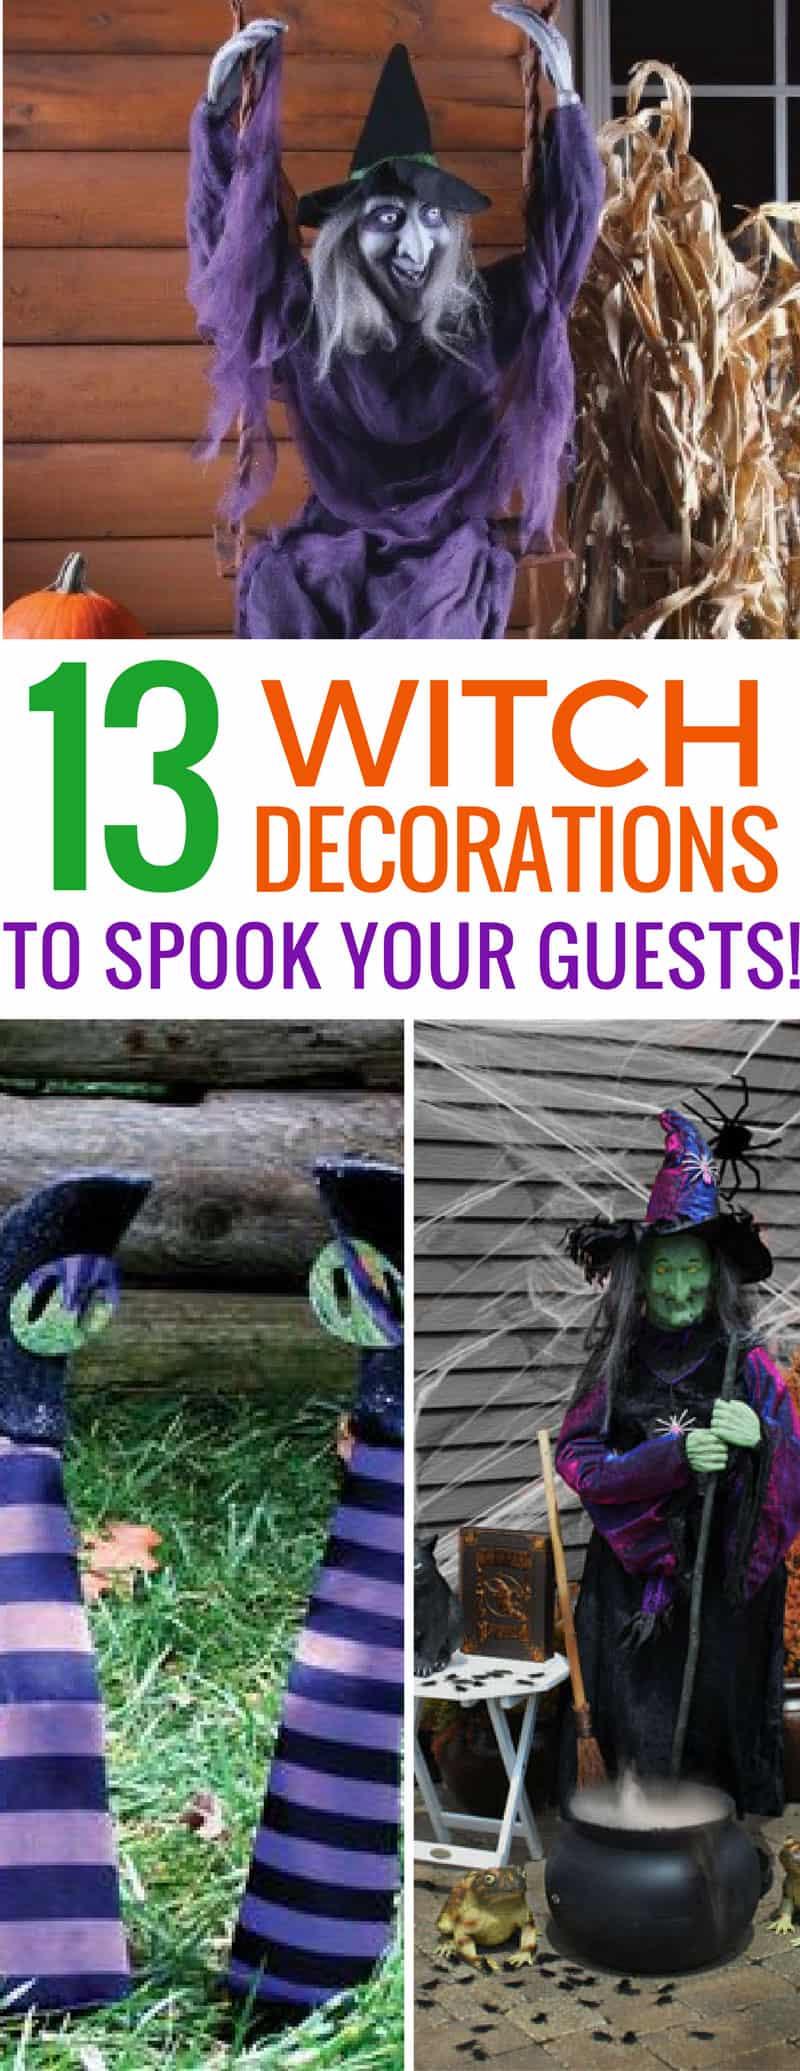 Loving these Halloween witch decorations and I'm sure my party gusts will too!